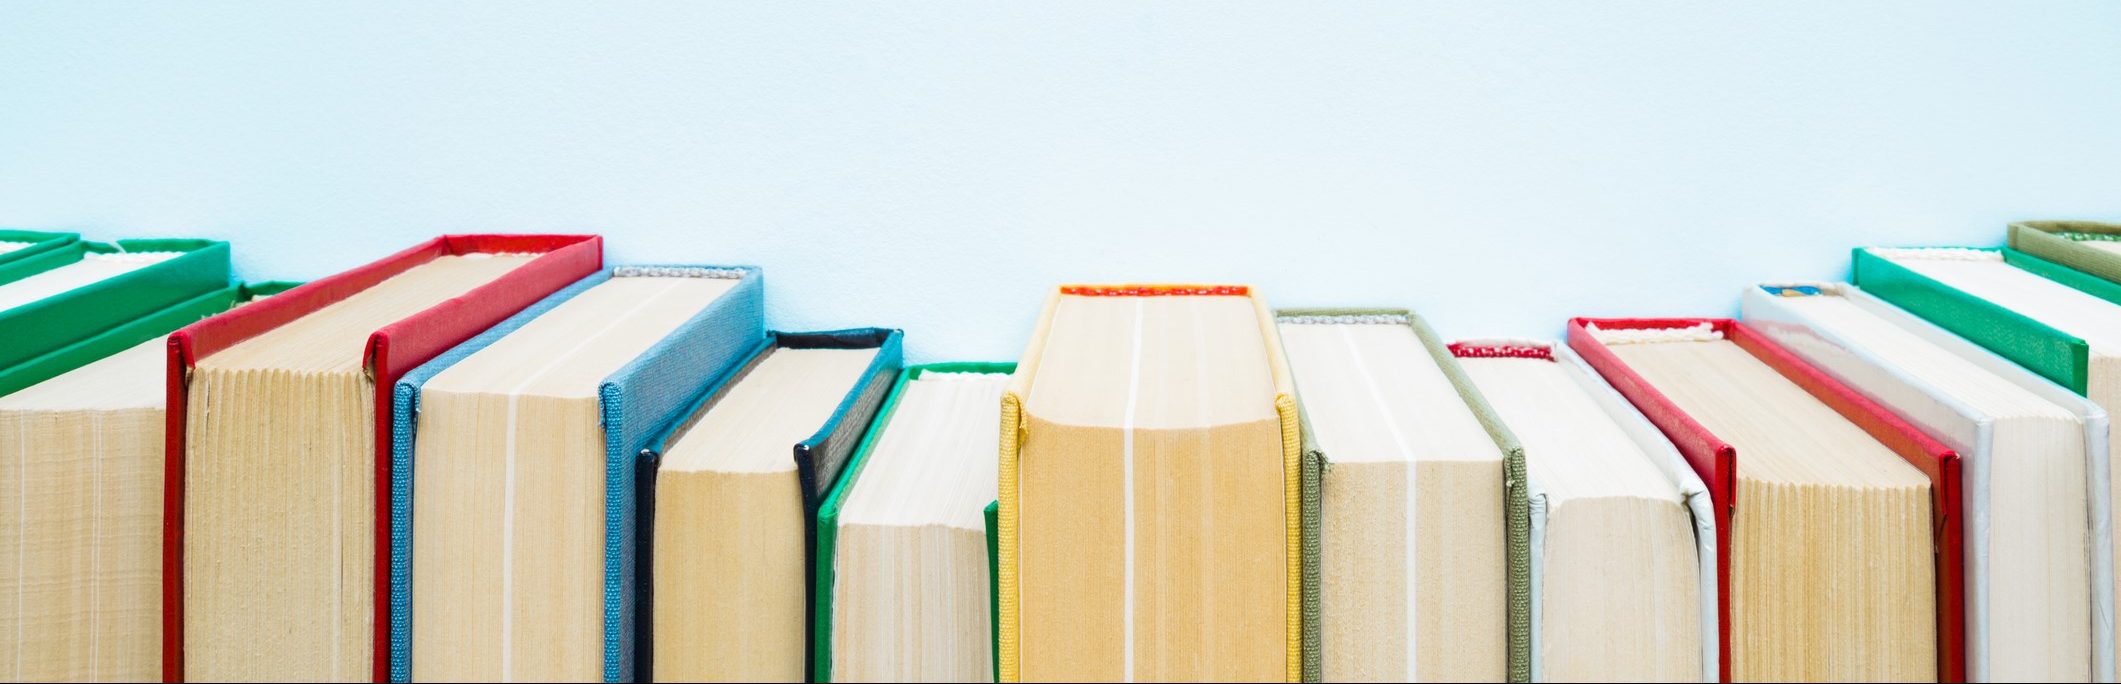 Row of old books with colorful covers on pastel blue background